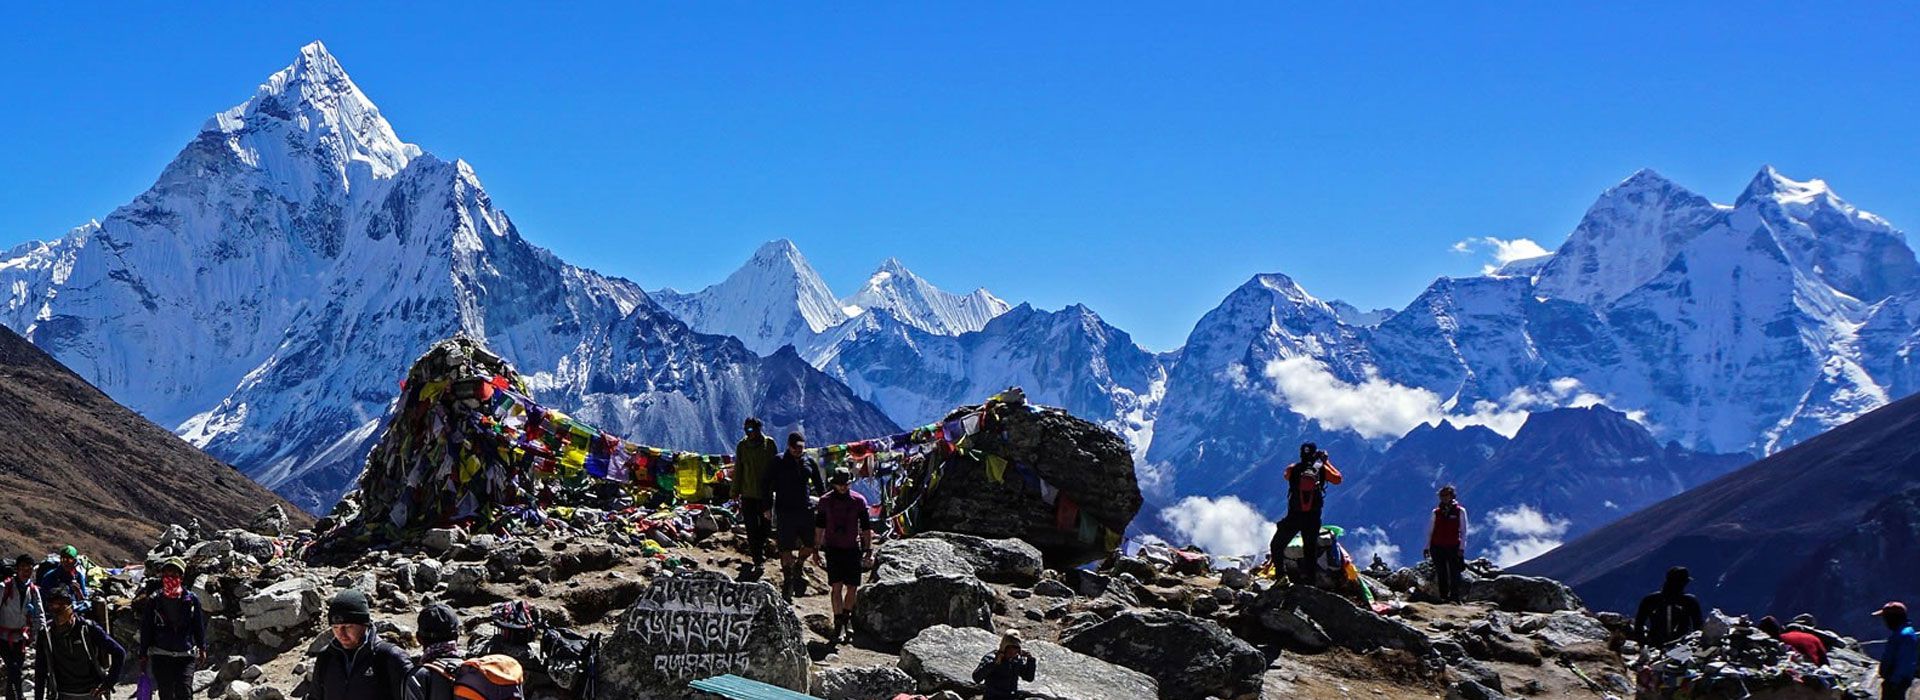 View from Everest Base Camp